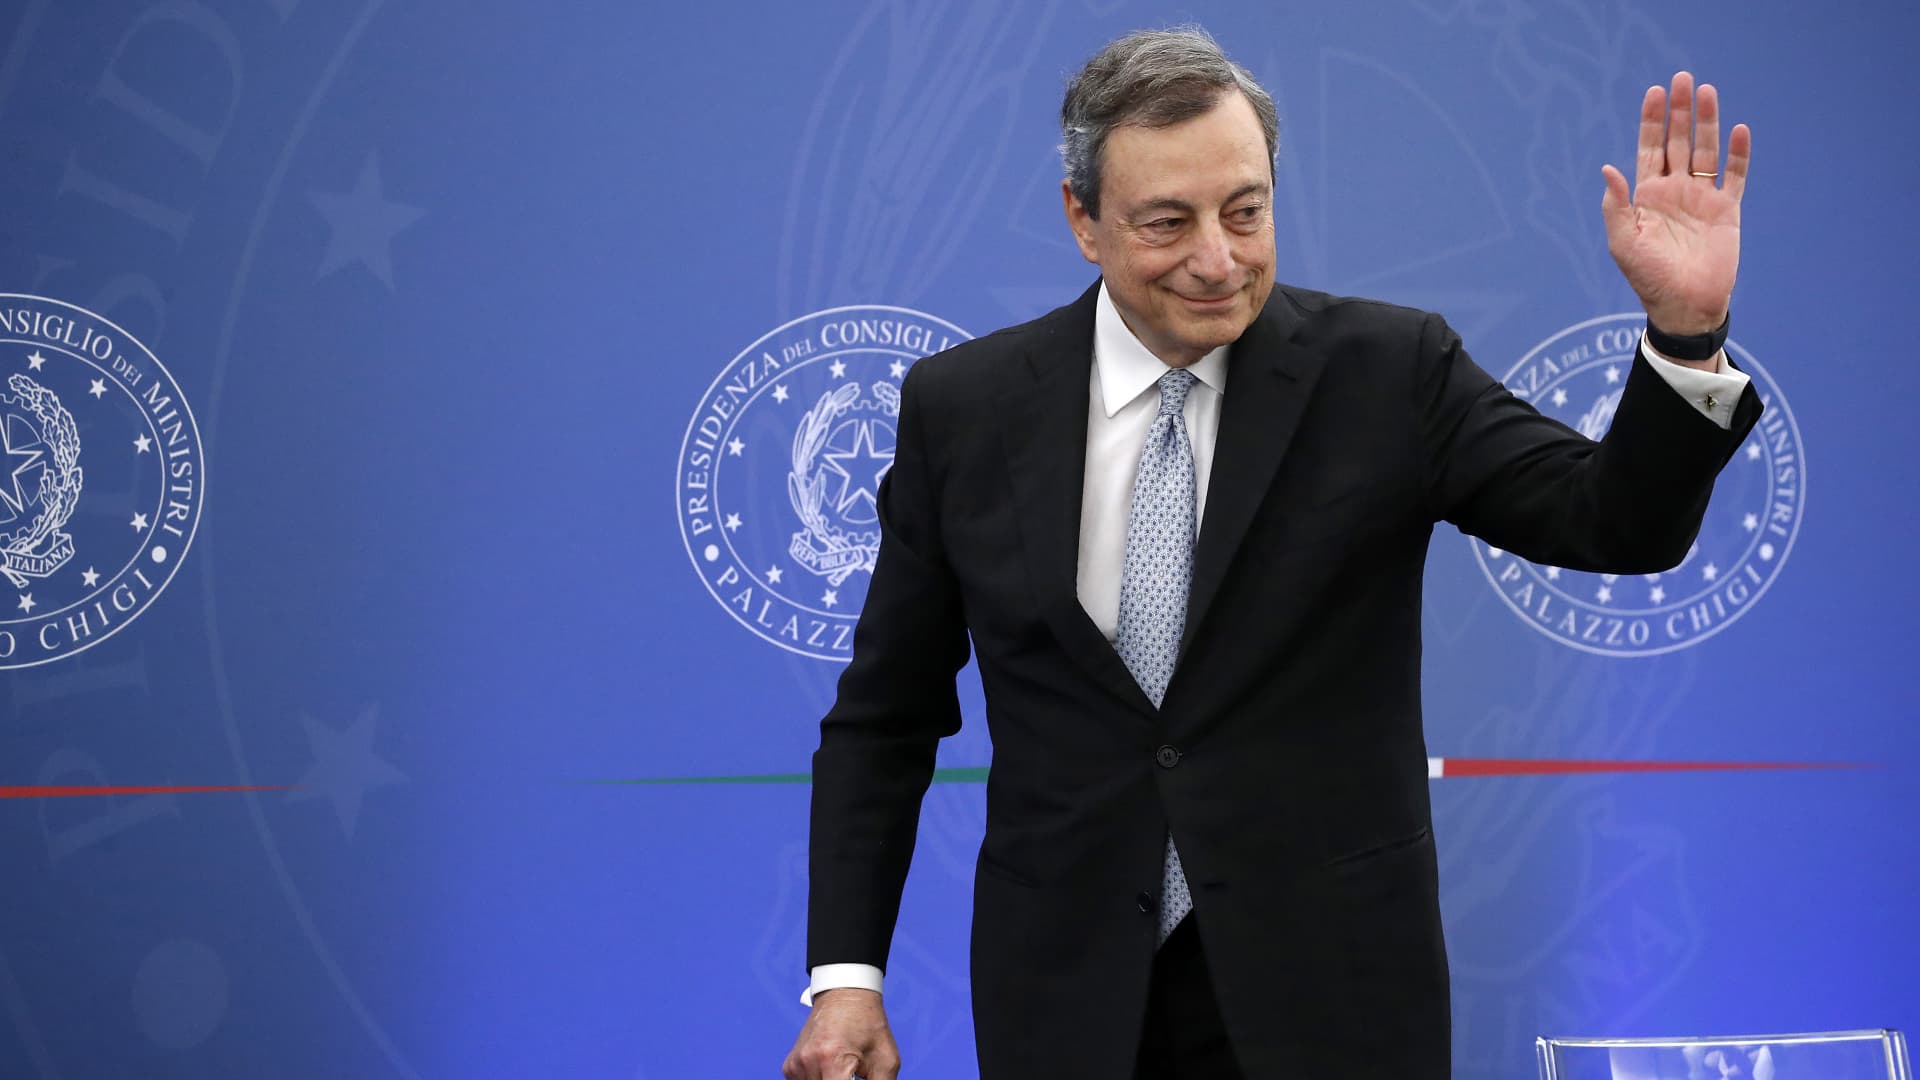 Italian PM Mario Draghi tenders resignation after failing to revive his coalition government